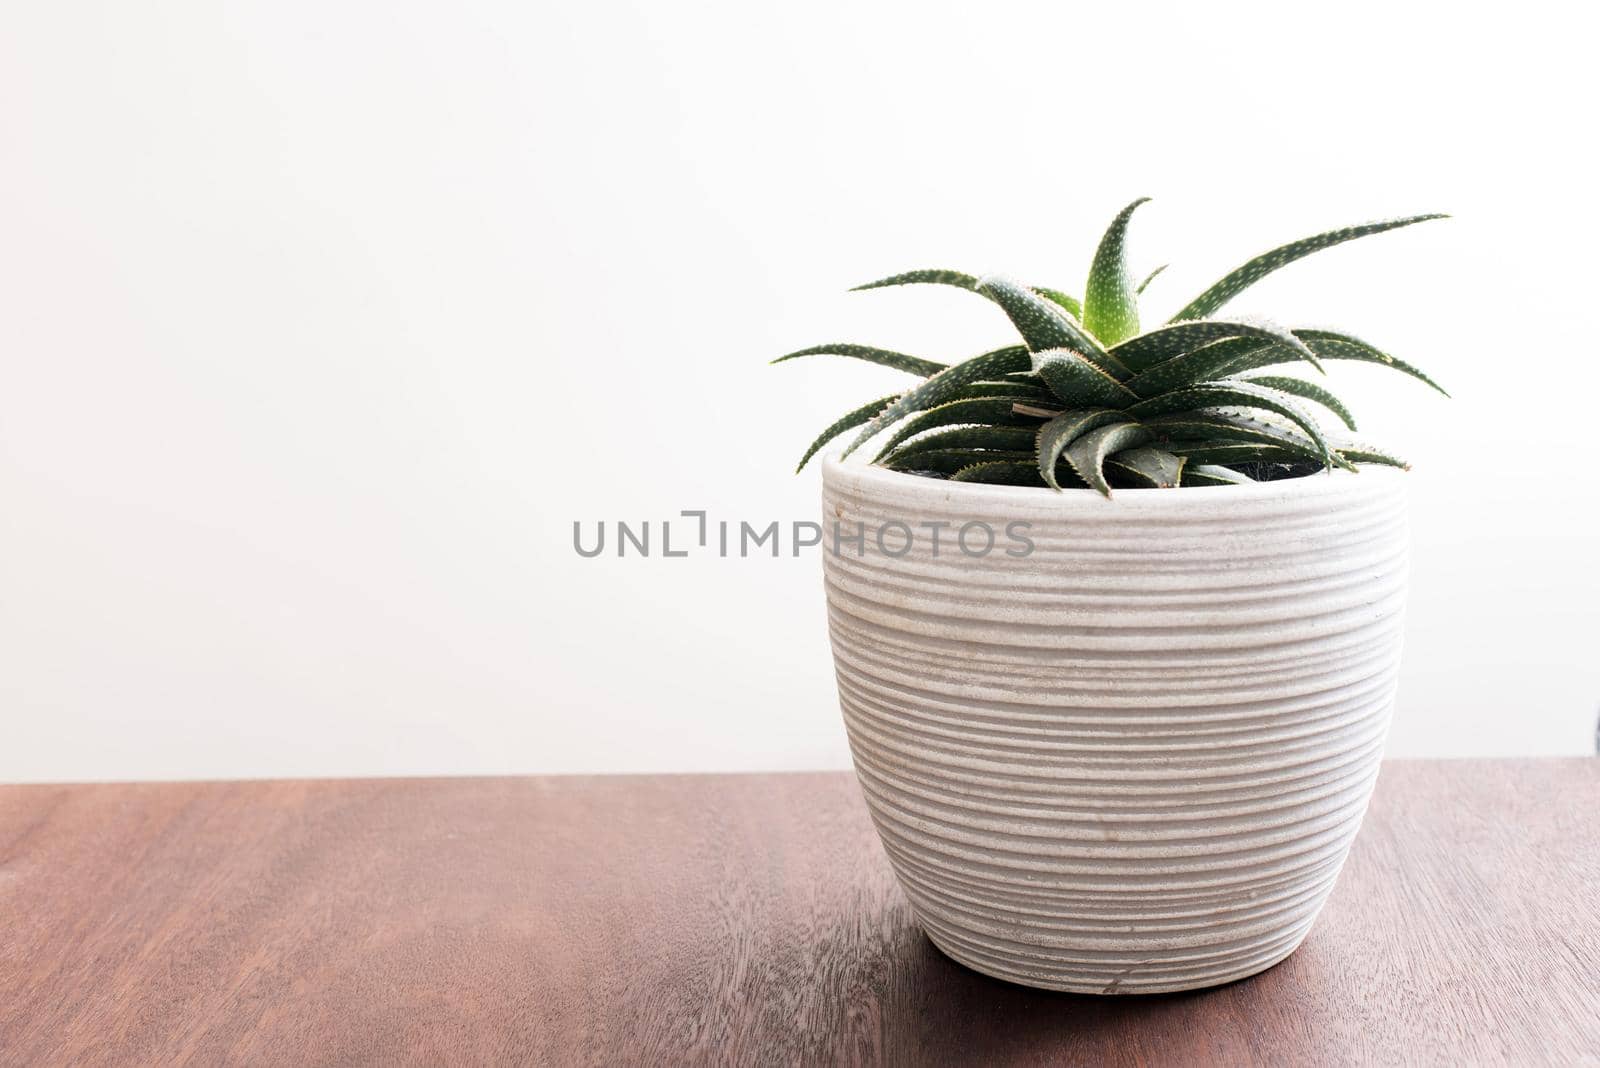 Side view of green aloe plant in white pot on top of wooden surface with plain wall behind. Copy space.